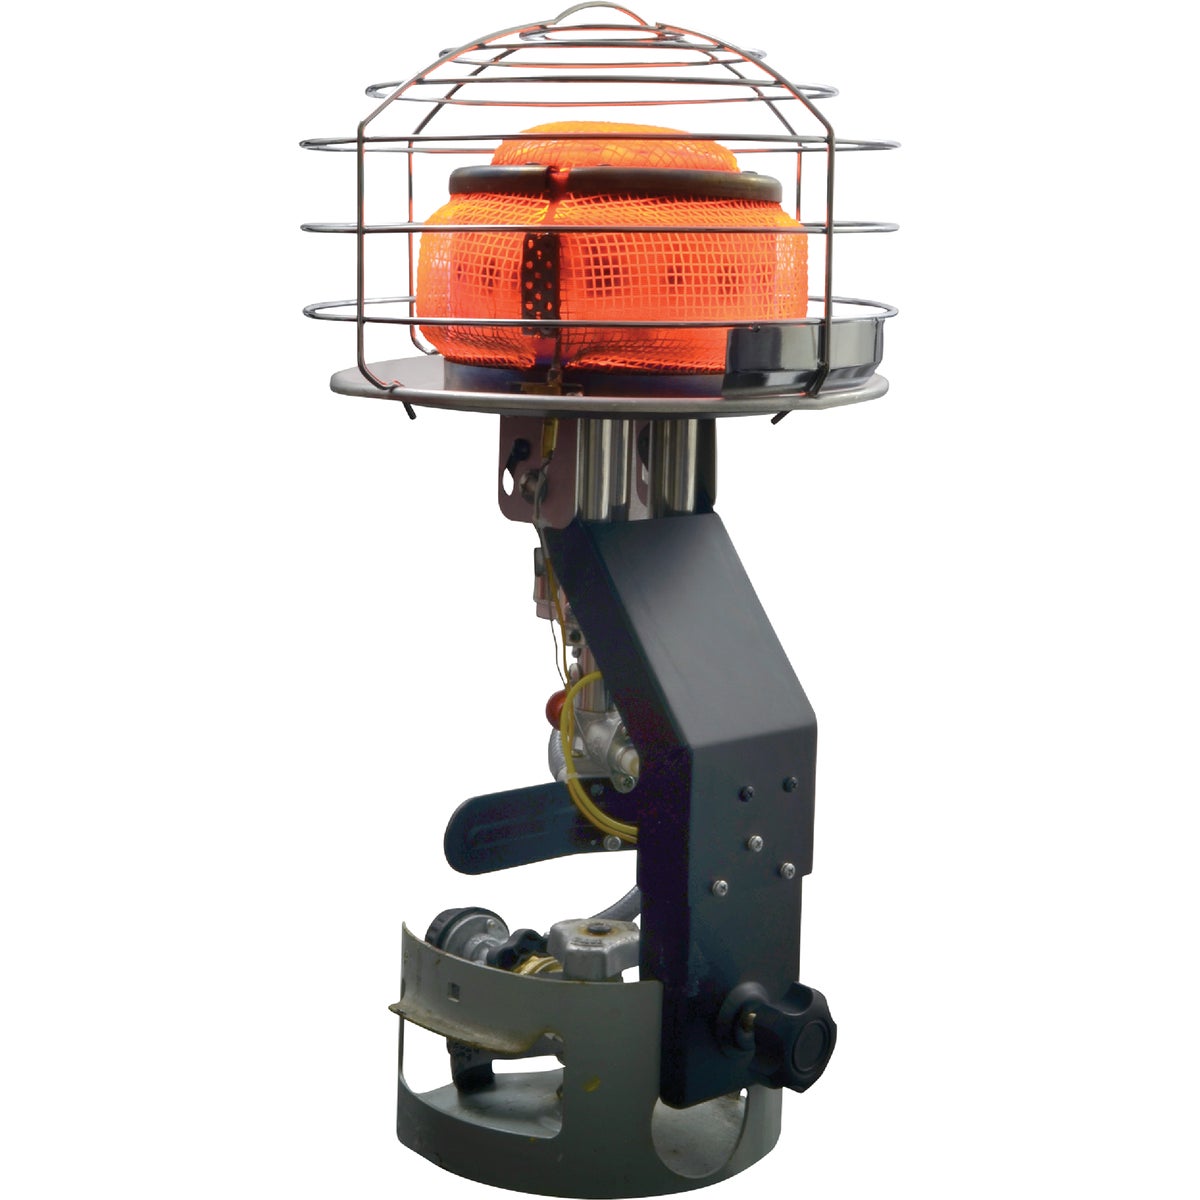 Item 401205, Tank top propane heater provides 540 deg (degree) of heat in a small and 